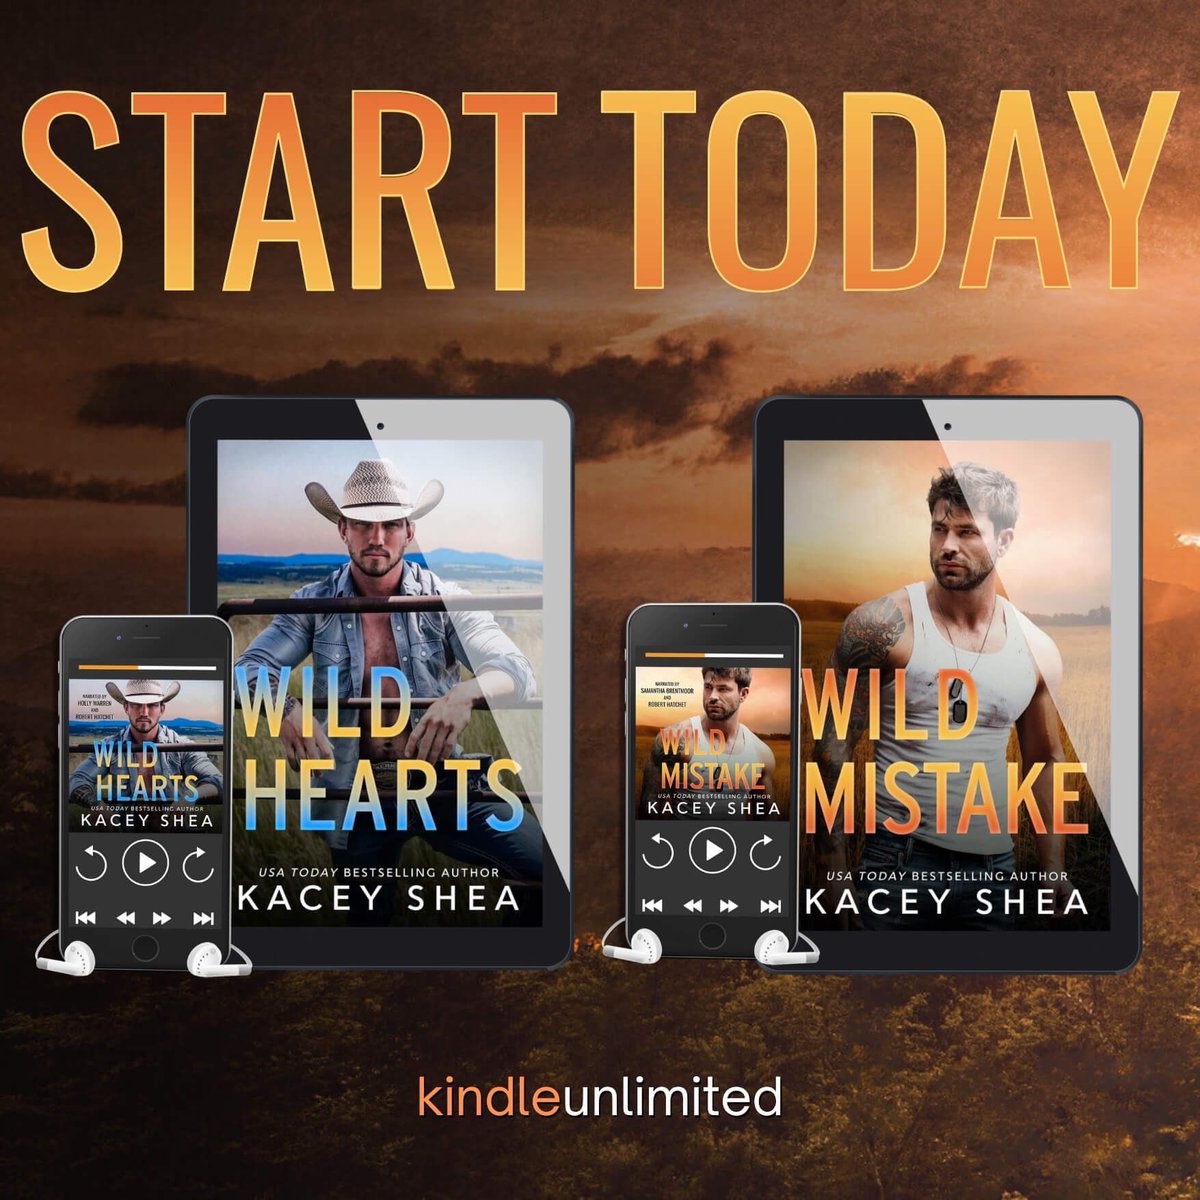 ✨Available Now: WILD HEARTS & WILD MISTAKE by @kaceysheabooks ! Grab them in KU! Also available in Audio! #OneClickHere  kaceysheabooks.com/small-town-rom…  @theauthoragency